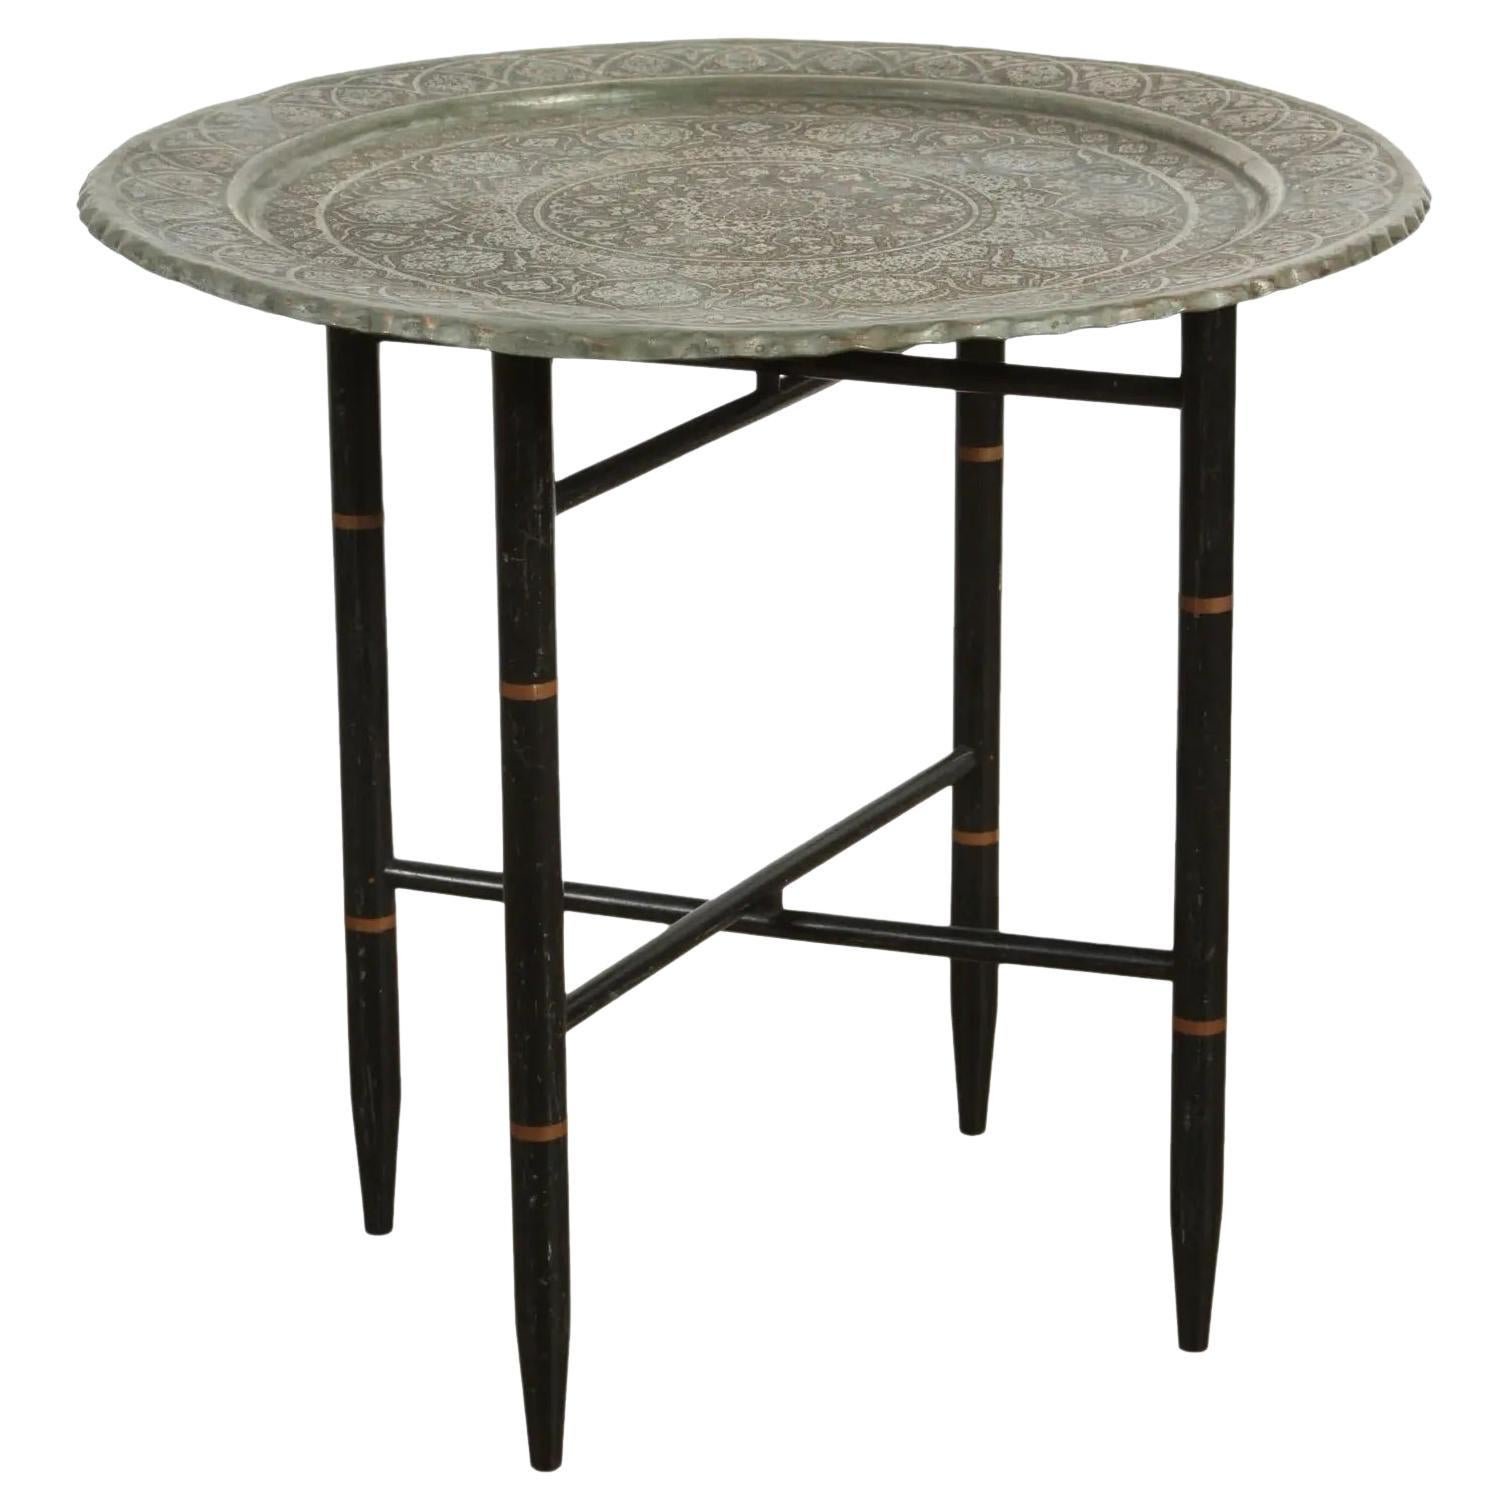 19th Century Persian Style Copper Tray Side Table